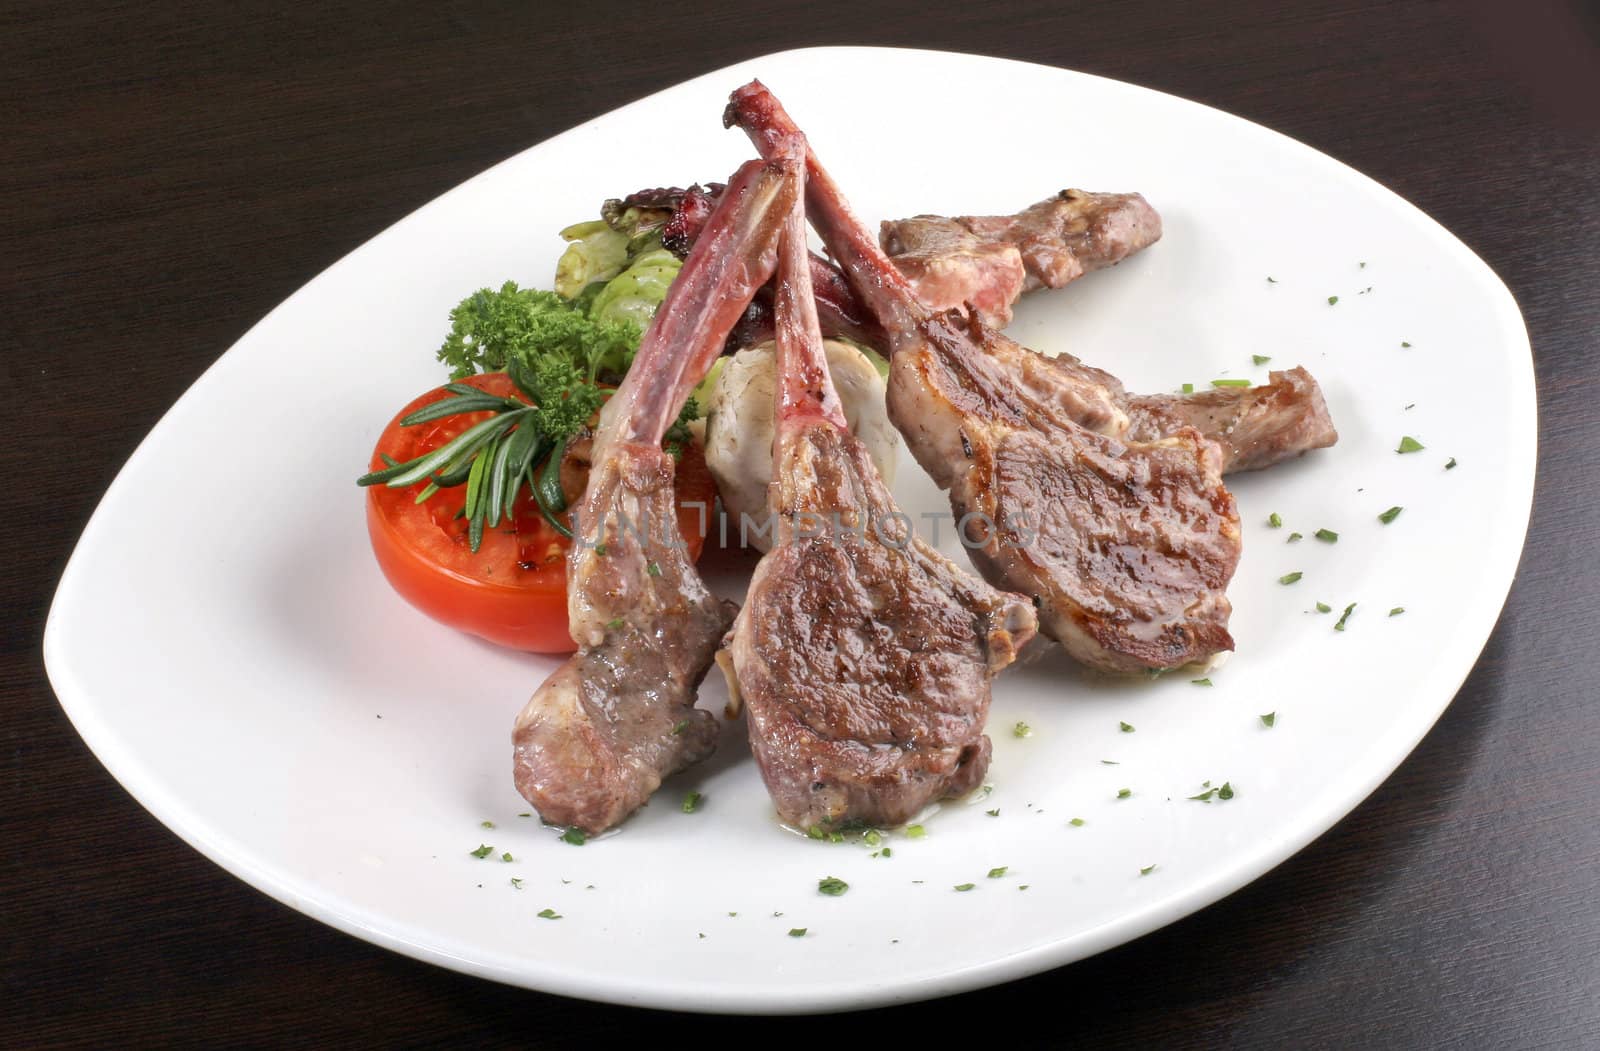 Rib of lamb grill with vegetables